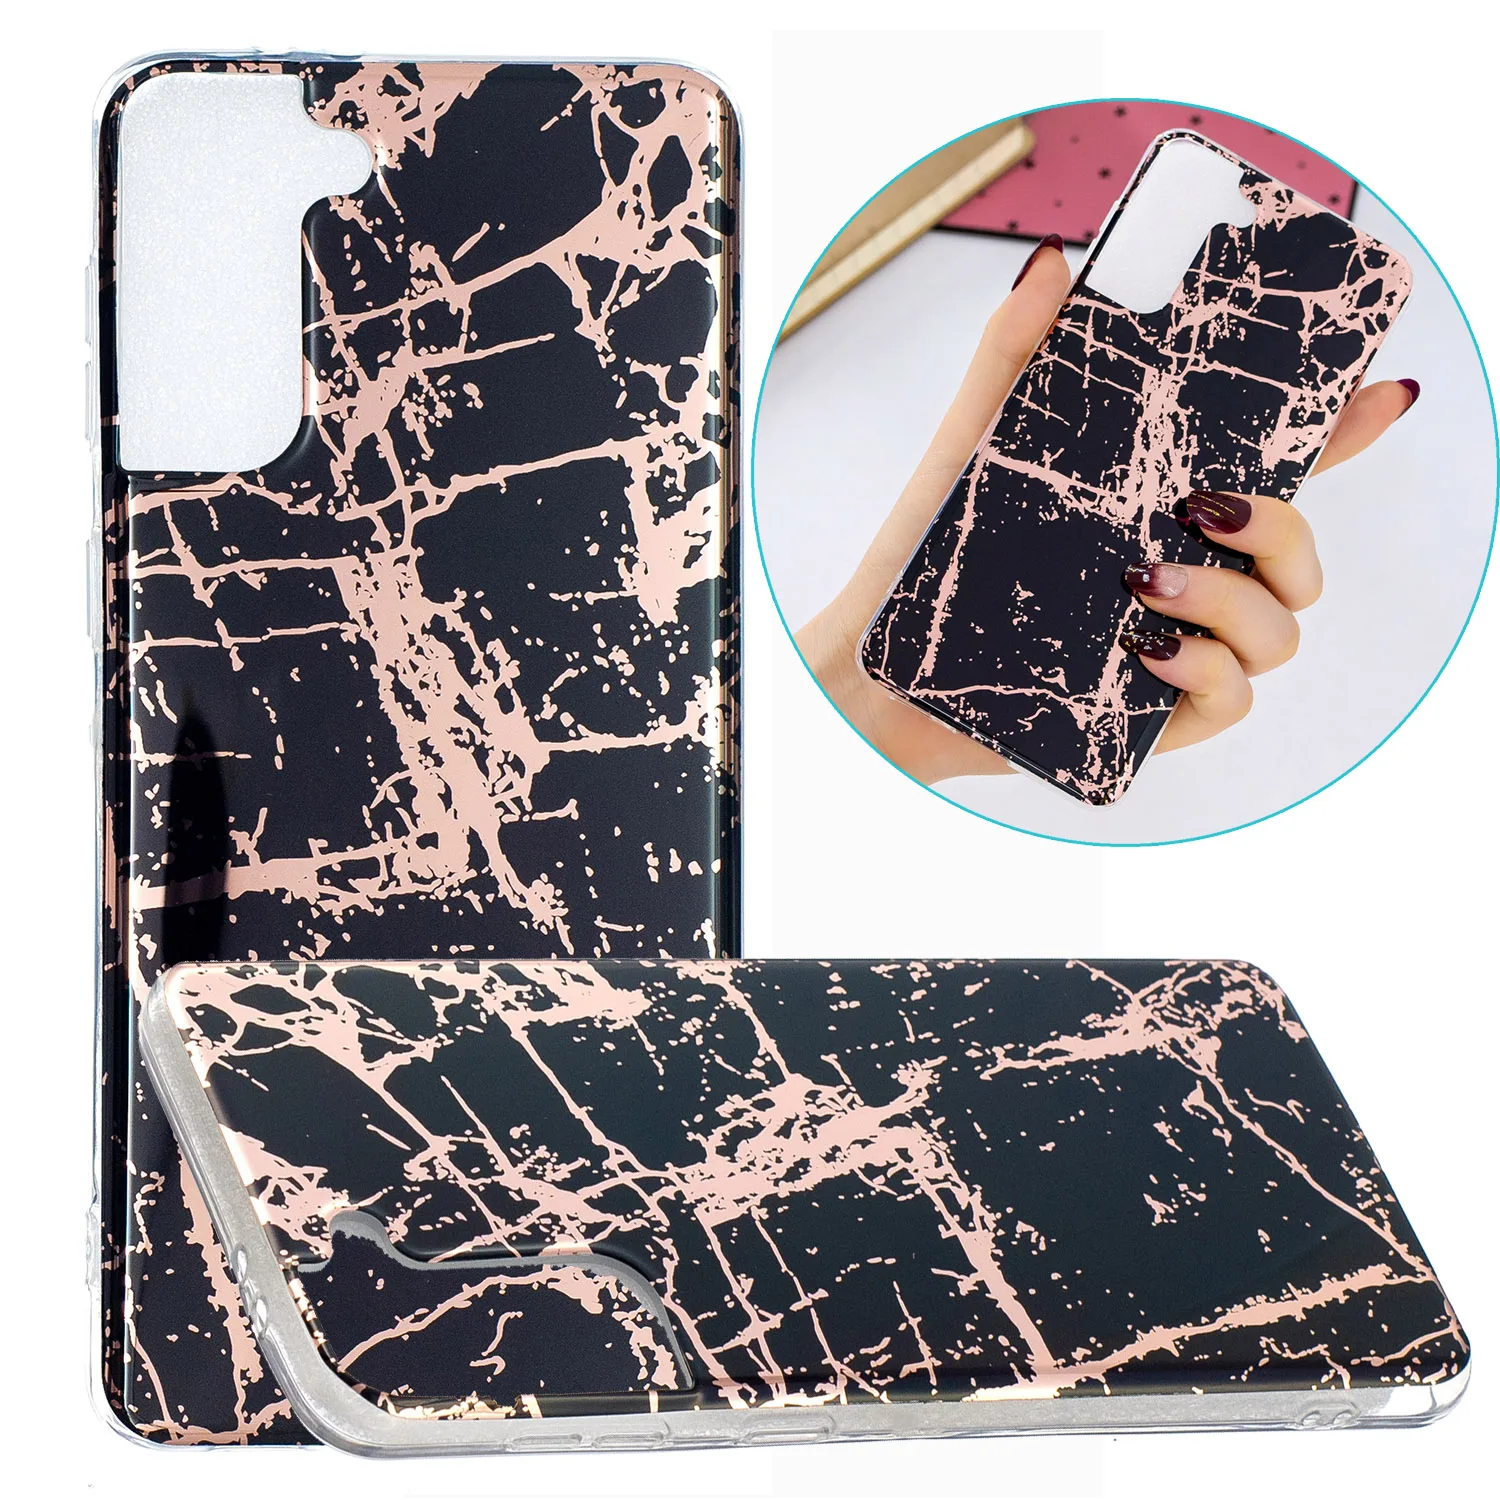 

Marble Phone Cases For Samsung Galaxy S30 Plus S10 S8 S9 Note 20 S20 Ultra 10 Plus A51 A71 A10 A20 A30 A50 A70 Case Cover Capa